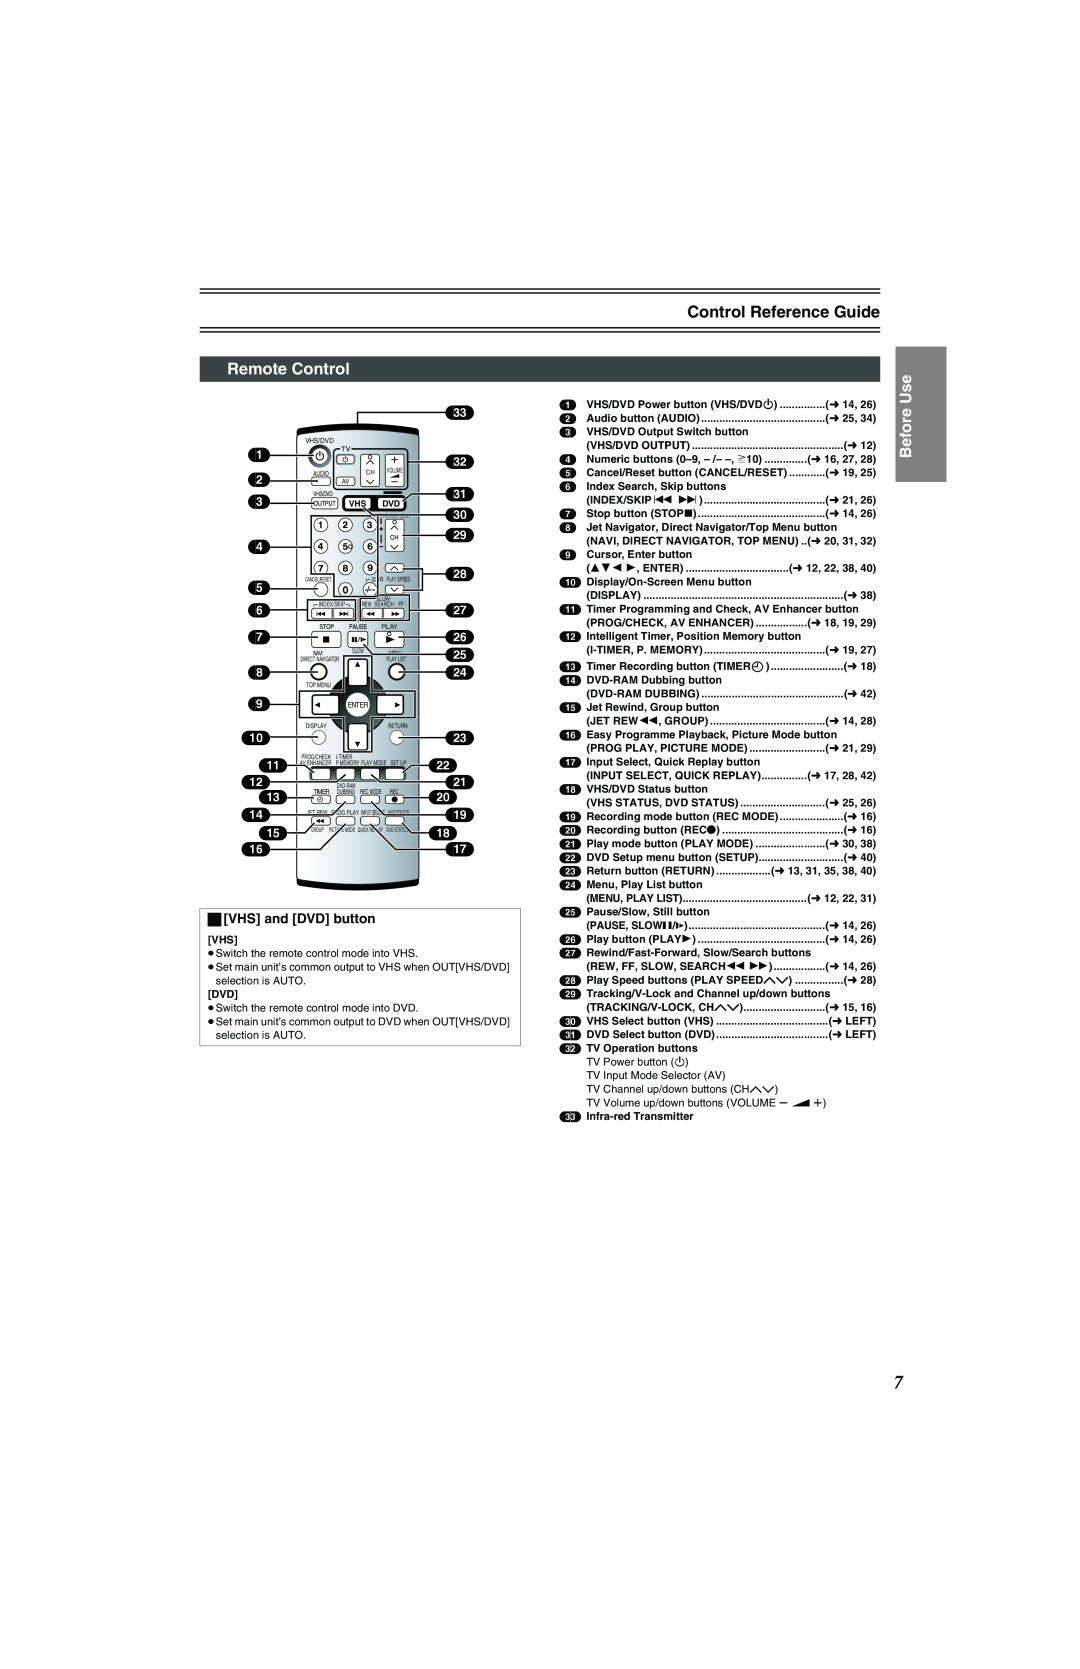 Panasonic NV-VP32 Series Control Reference Guide, Remote Control, ªVHS and DVD button, Before Use, l 14, l 16, 27, l 21 